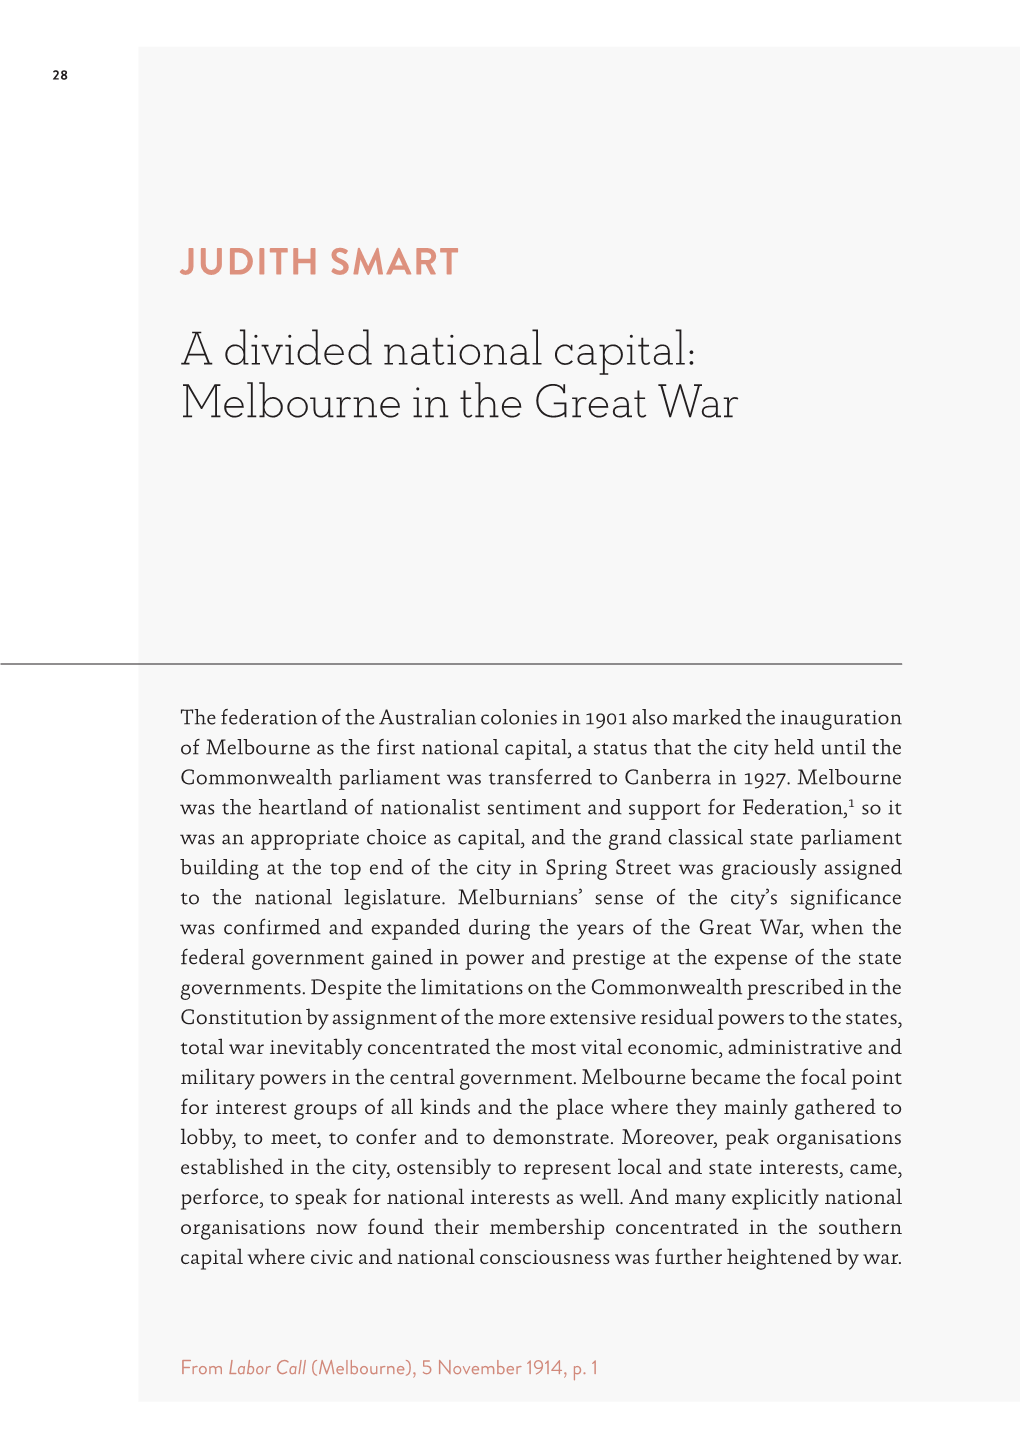 JUDITH SMART a Divided National Capital: Melbourne in the Great War